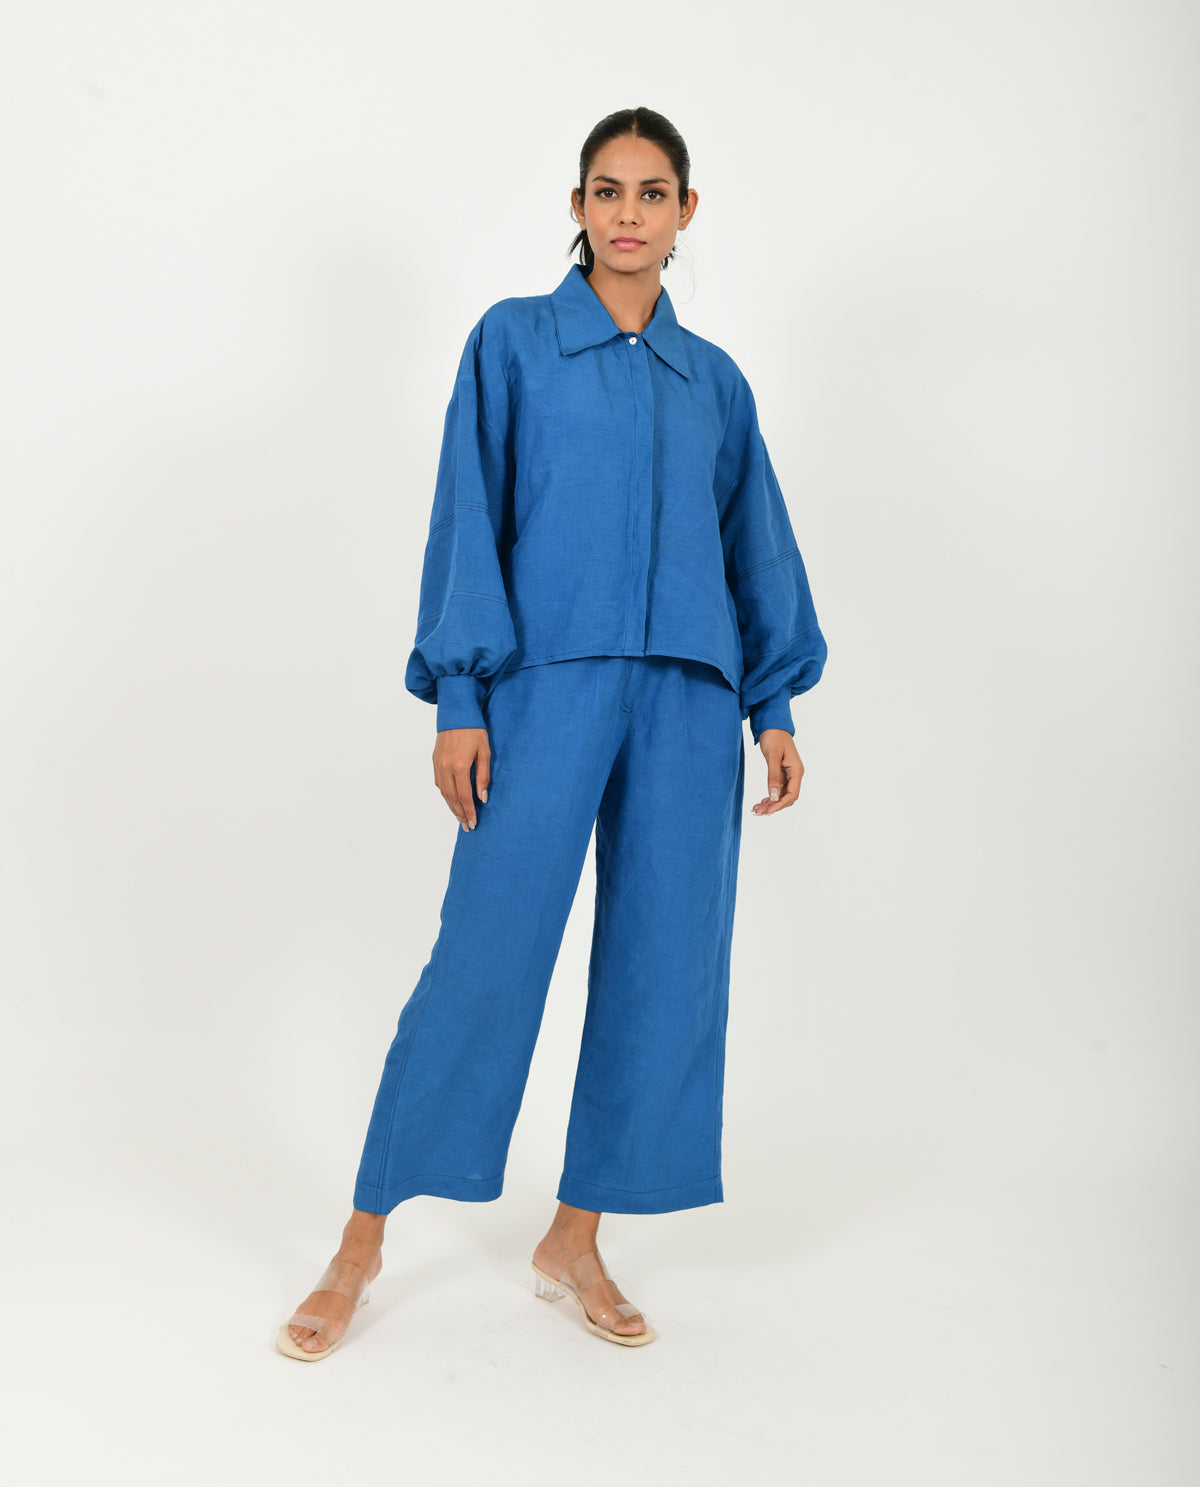 Blue Linen Pants by Rias Jaipur with Blue, Casual Wear, Linen Blend, Natural, Pants, Relaxed Fit, Solids, Womenswear, Yaadein, Yaadein by Rias Jaipur at Kamakhyaa for sustainable fashion